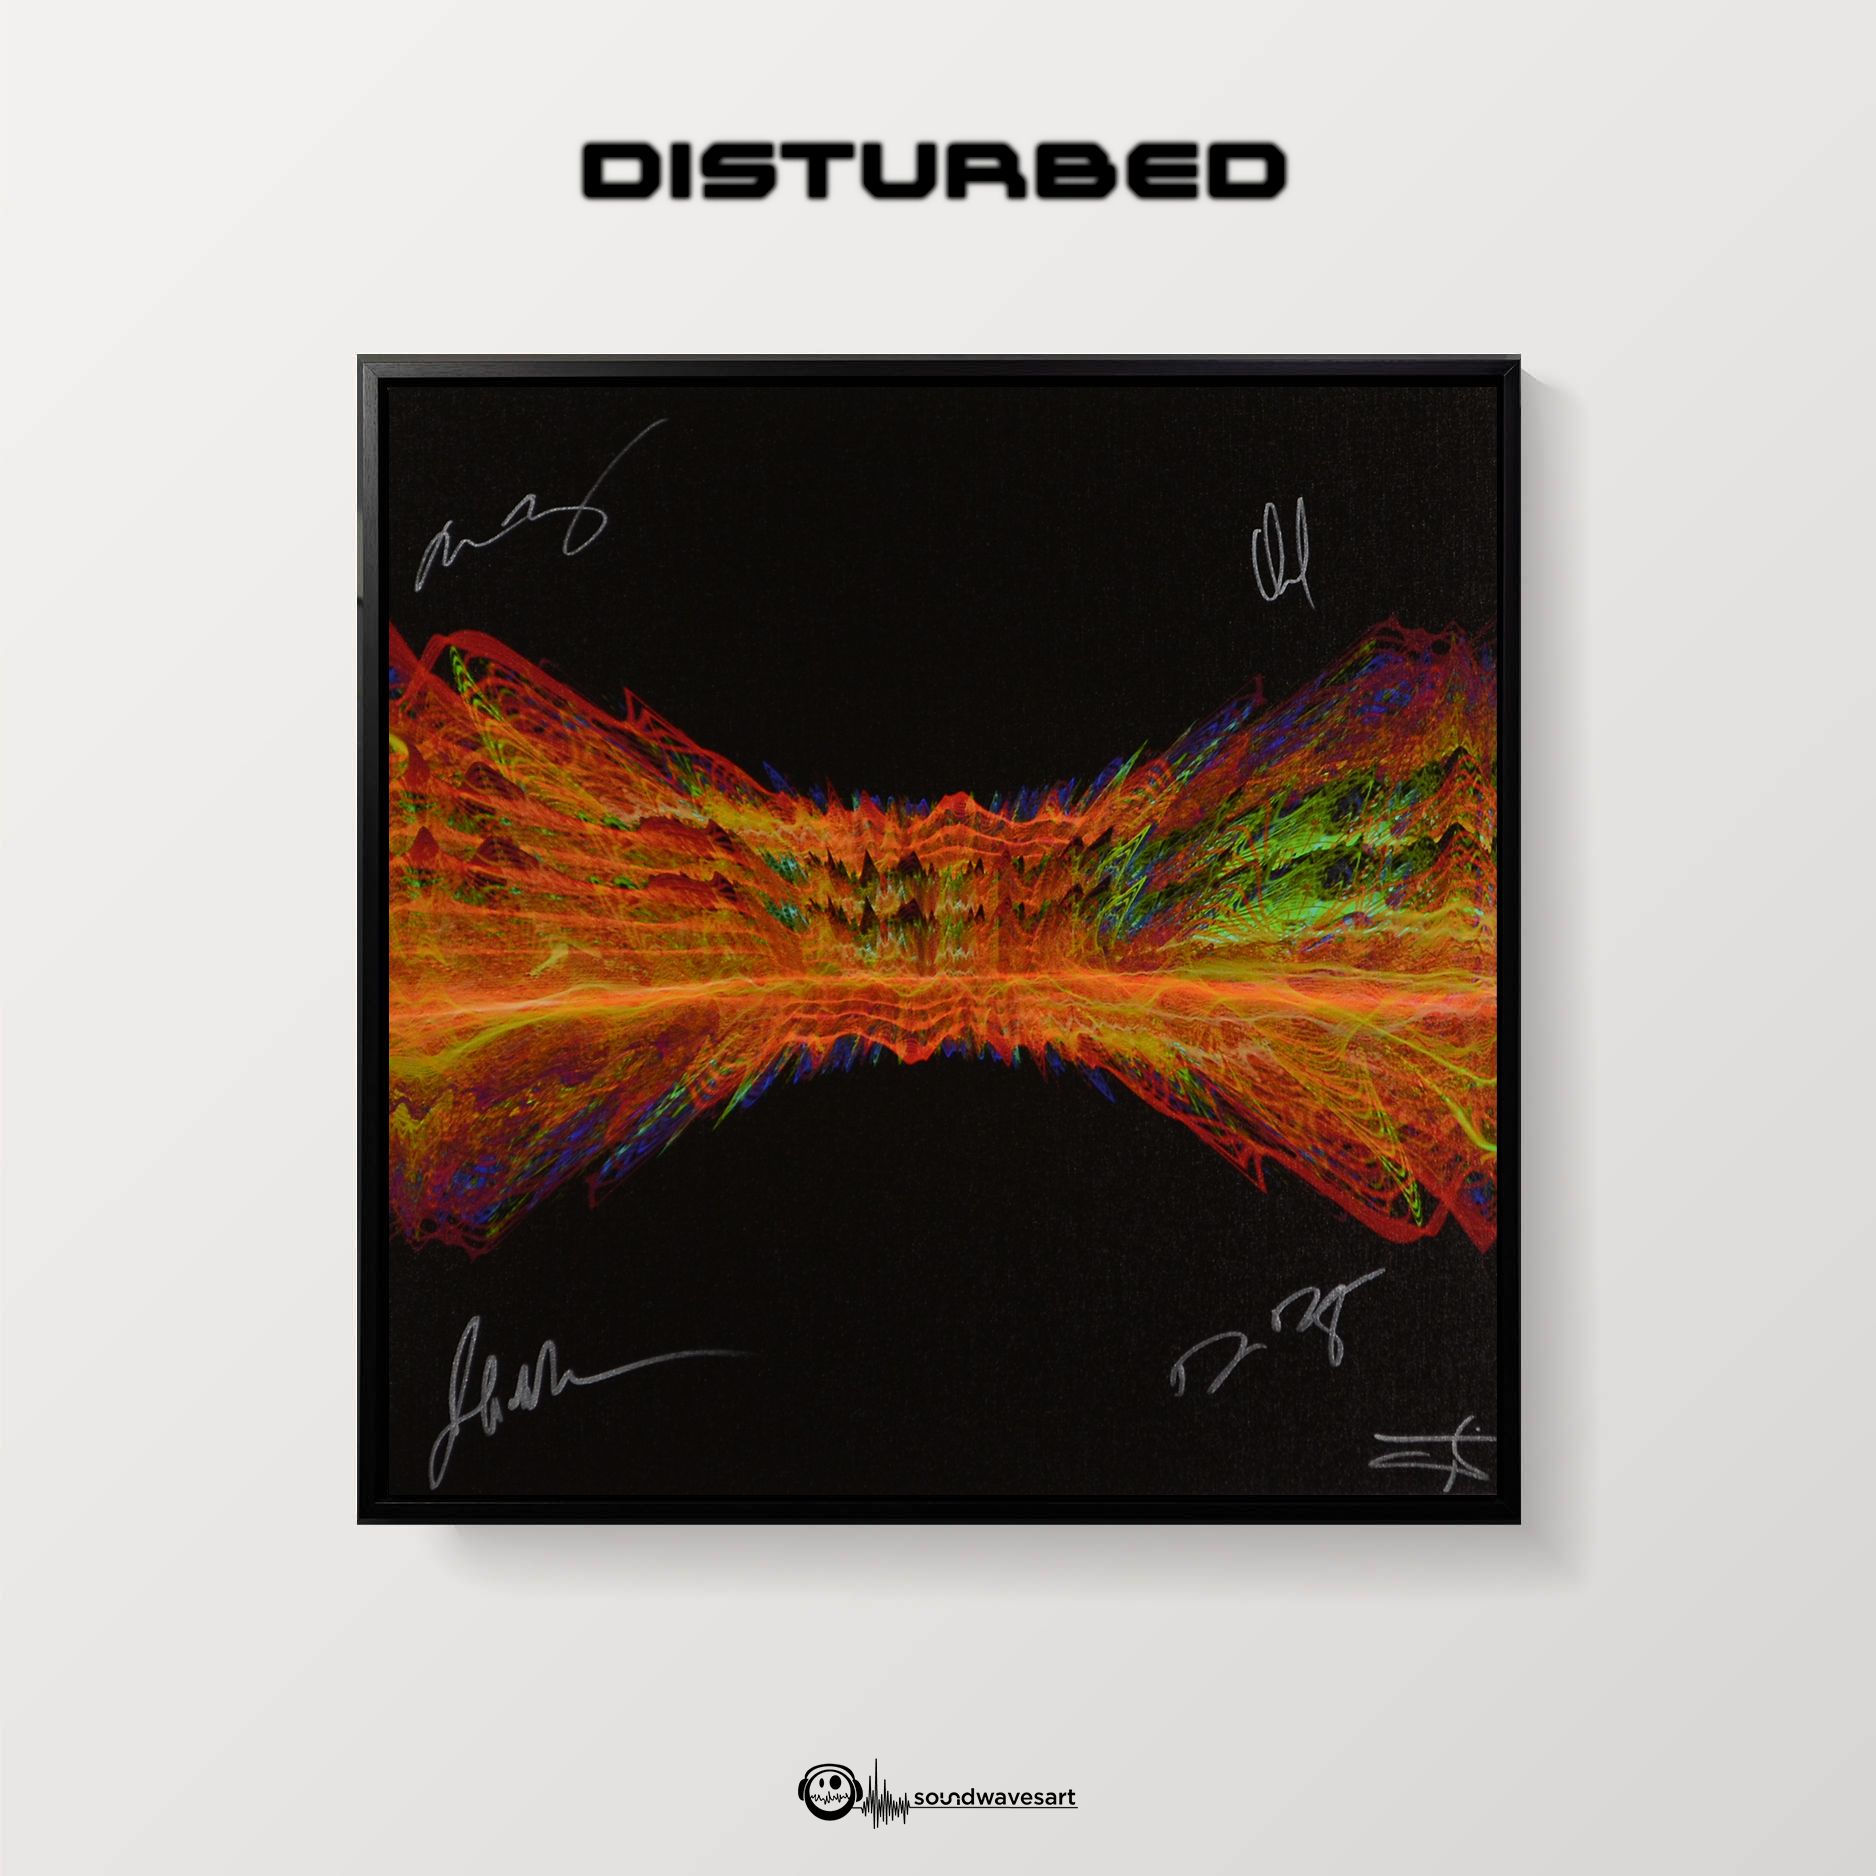 Disturbed “Down With The Sickness” Soundwaves Art for Charity